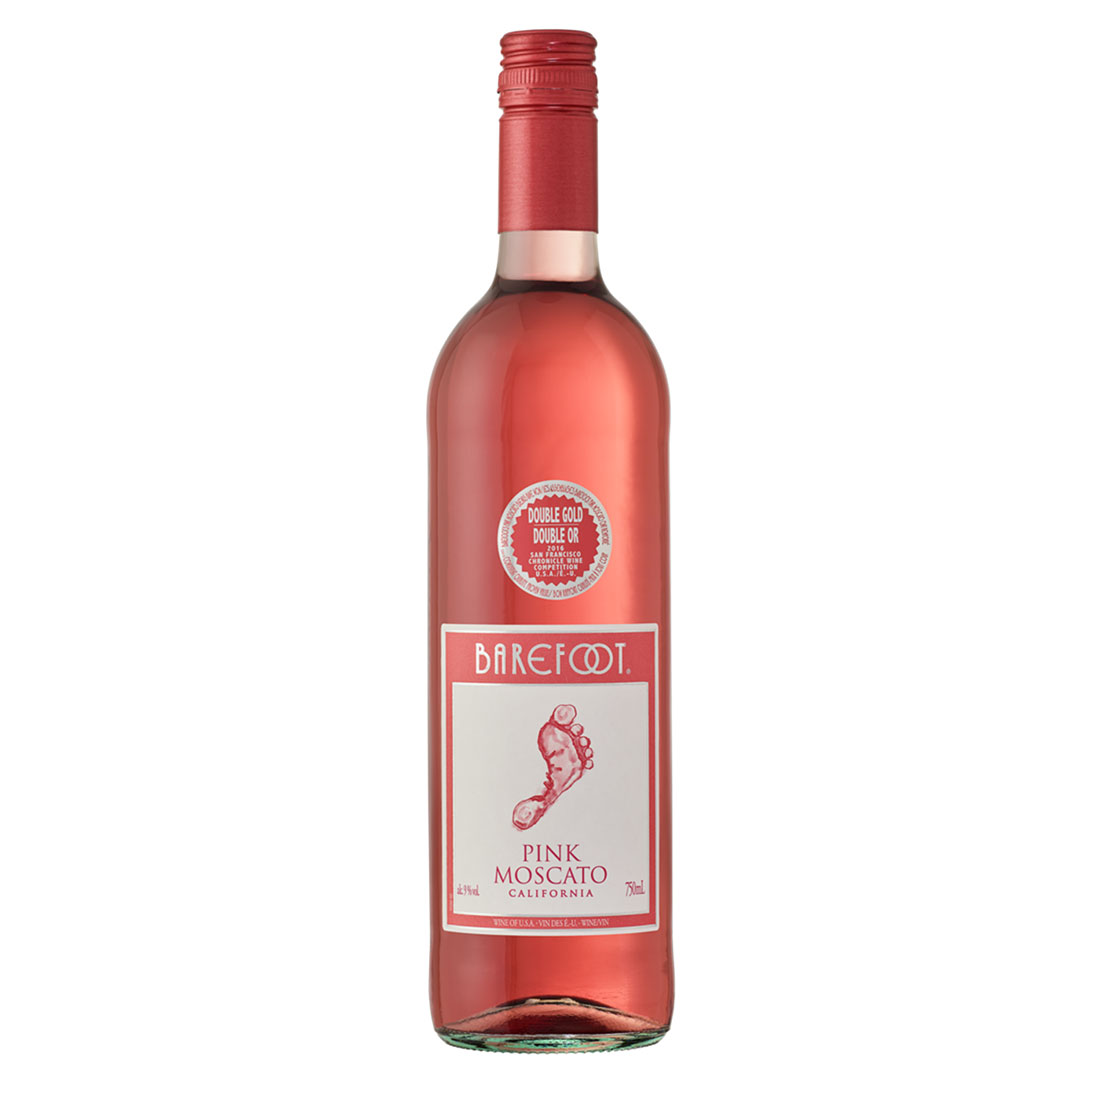 Bottle-Barefoot-Pink-Moscato